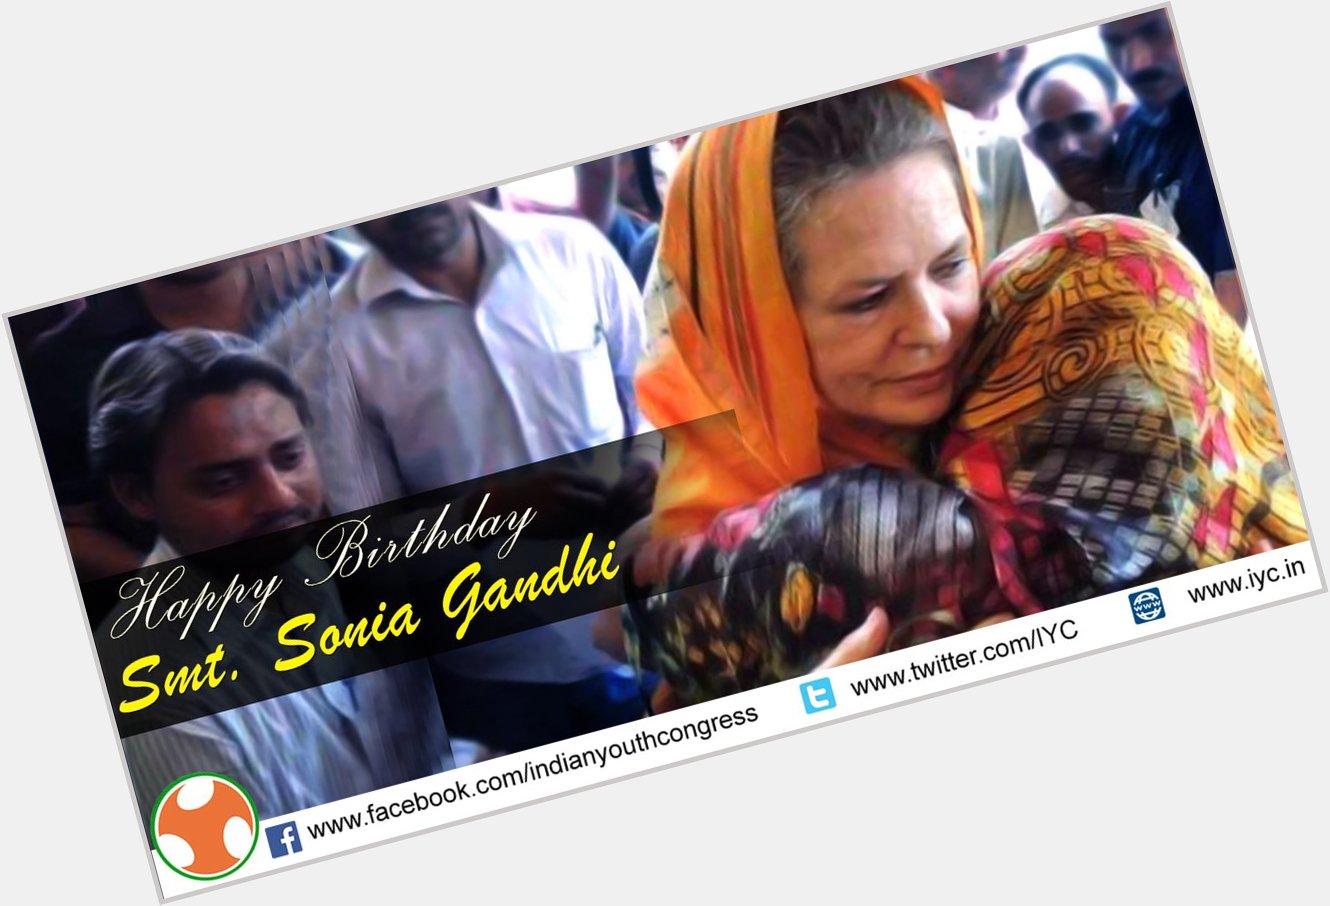 Smt Sonia Gandhi embraced India and the Indians to her life, Wishing her a very happy birthday 